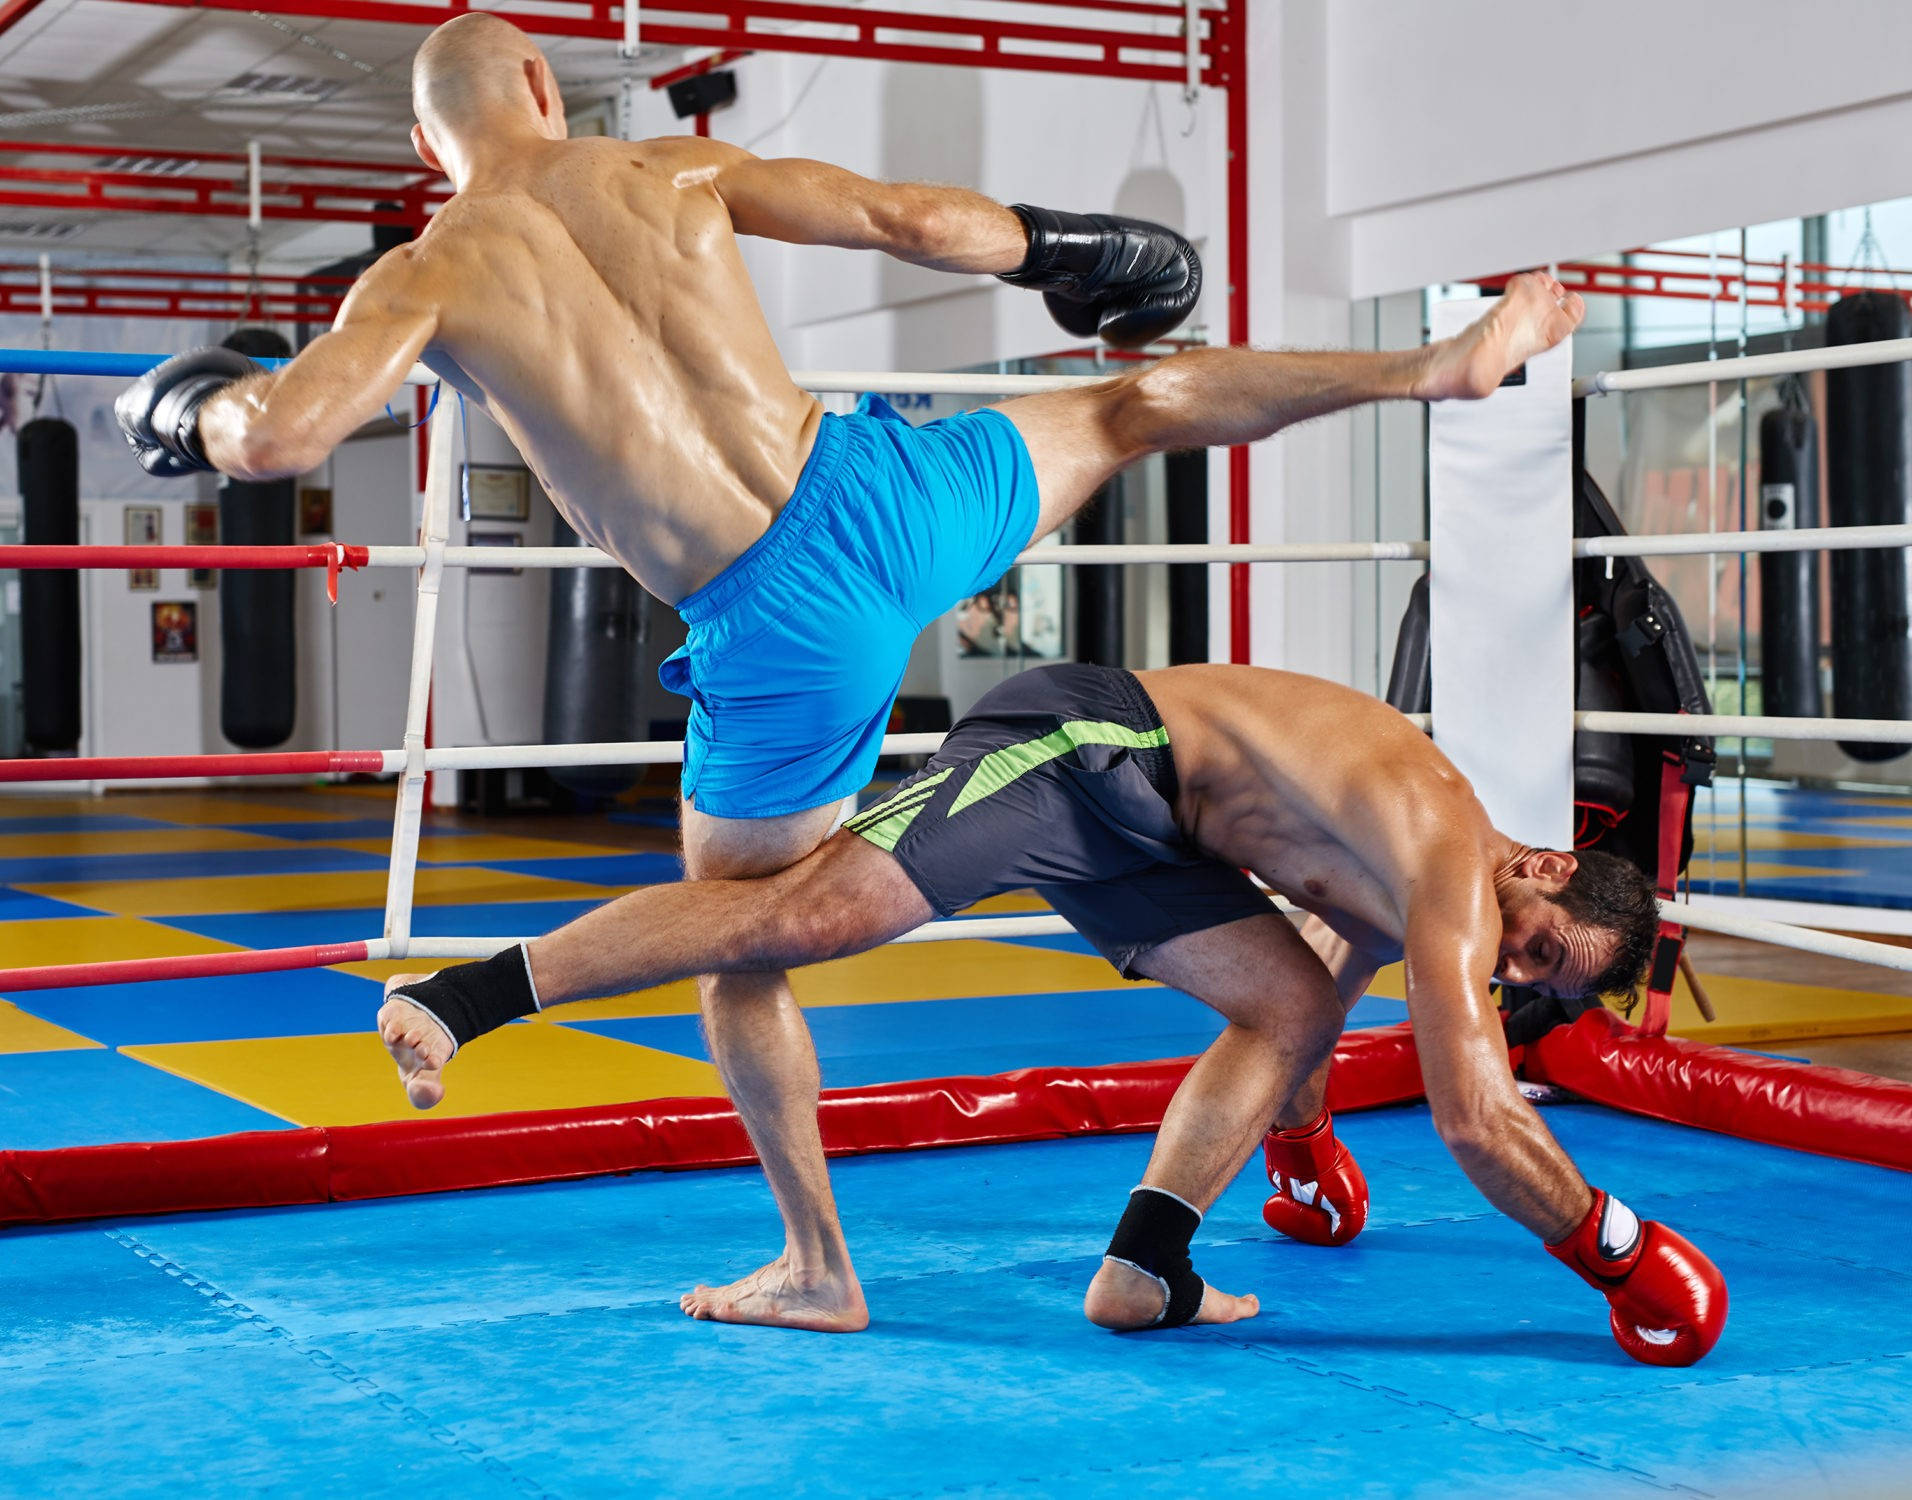 Kickboxing Sparring Match In The Gym Wallpaper